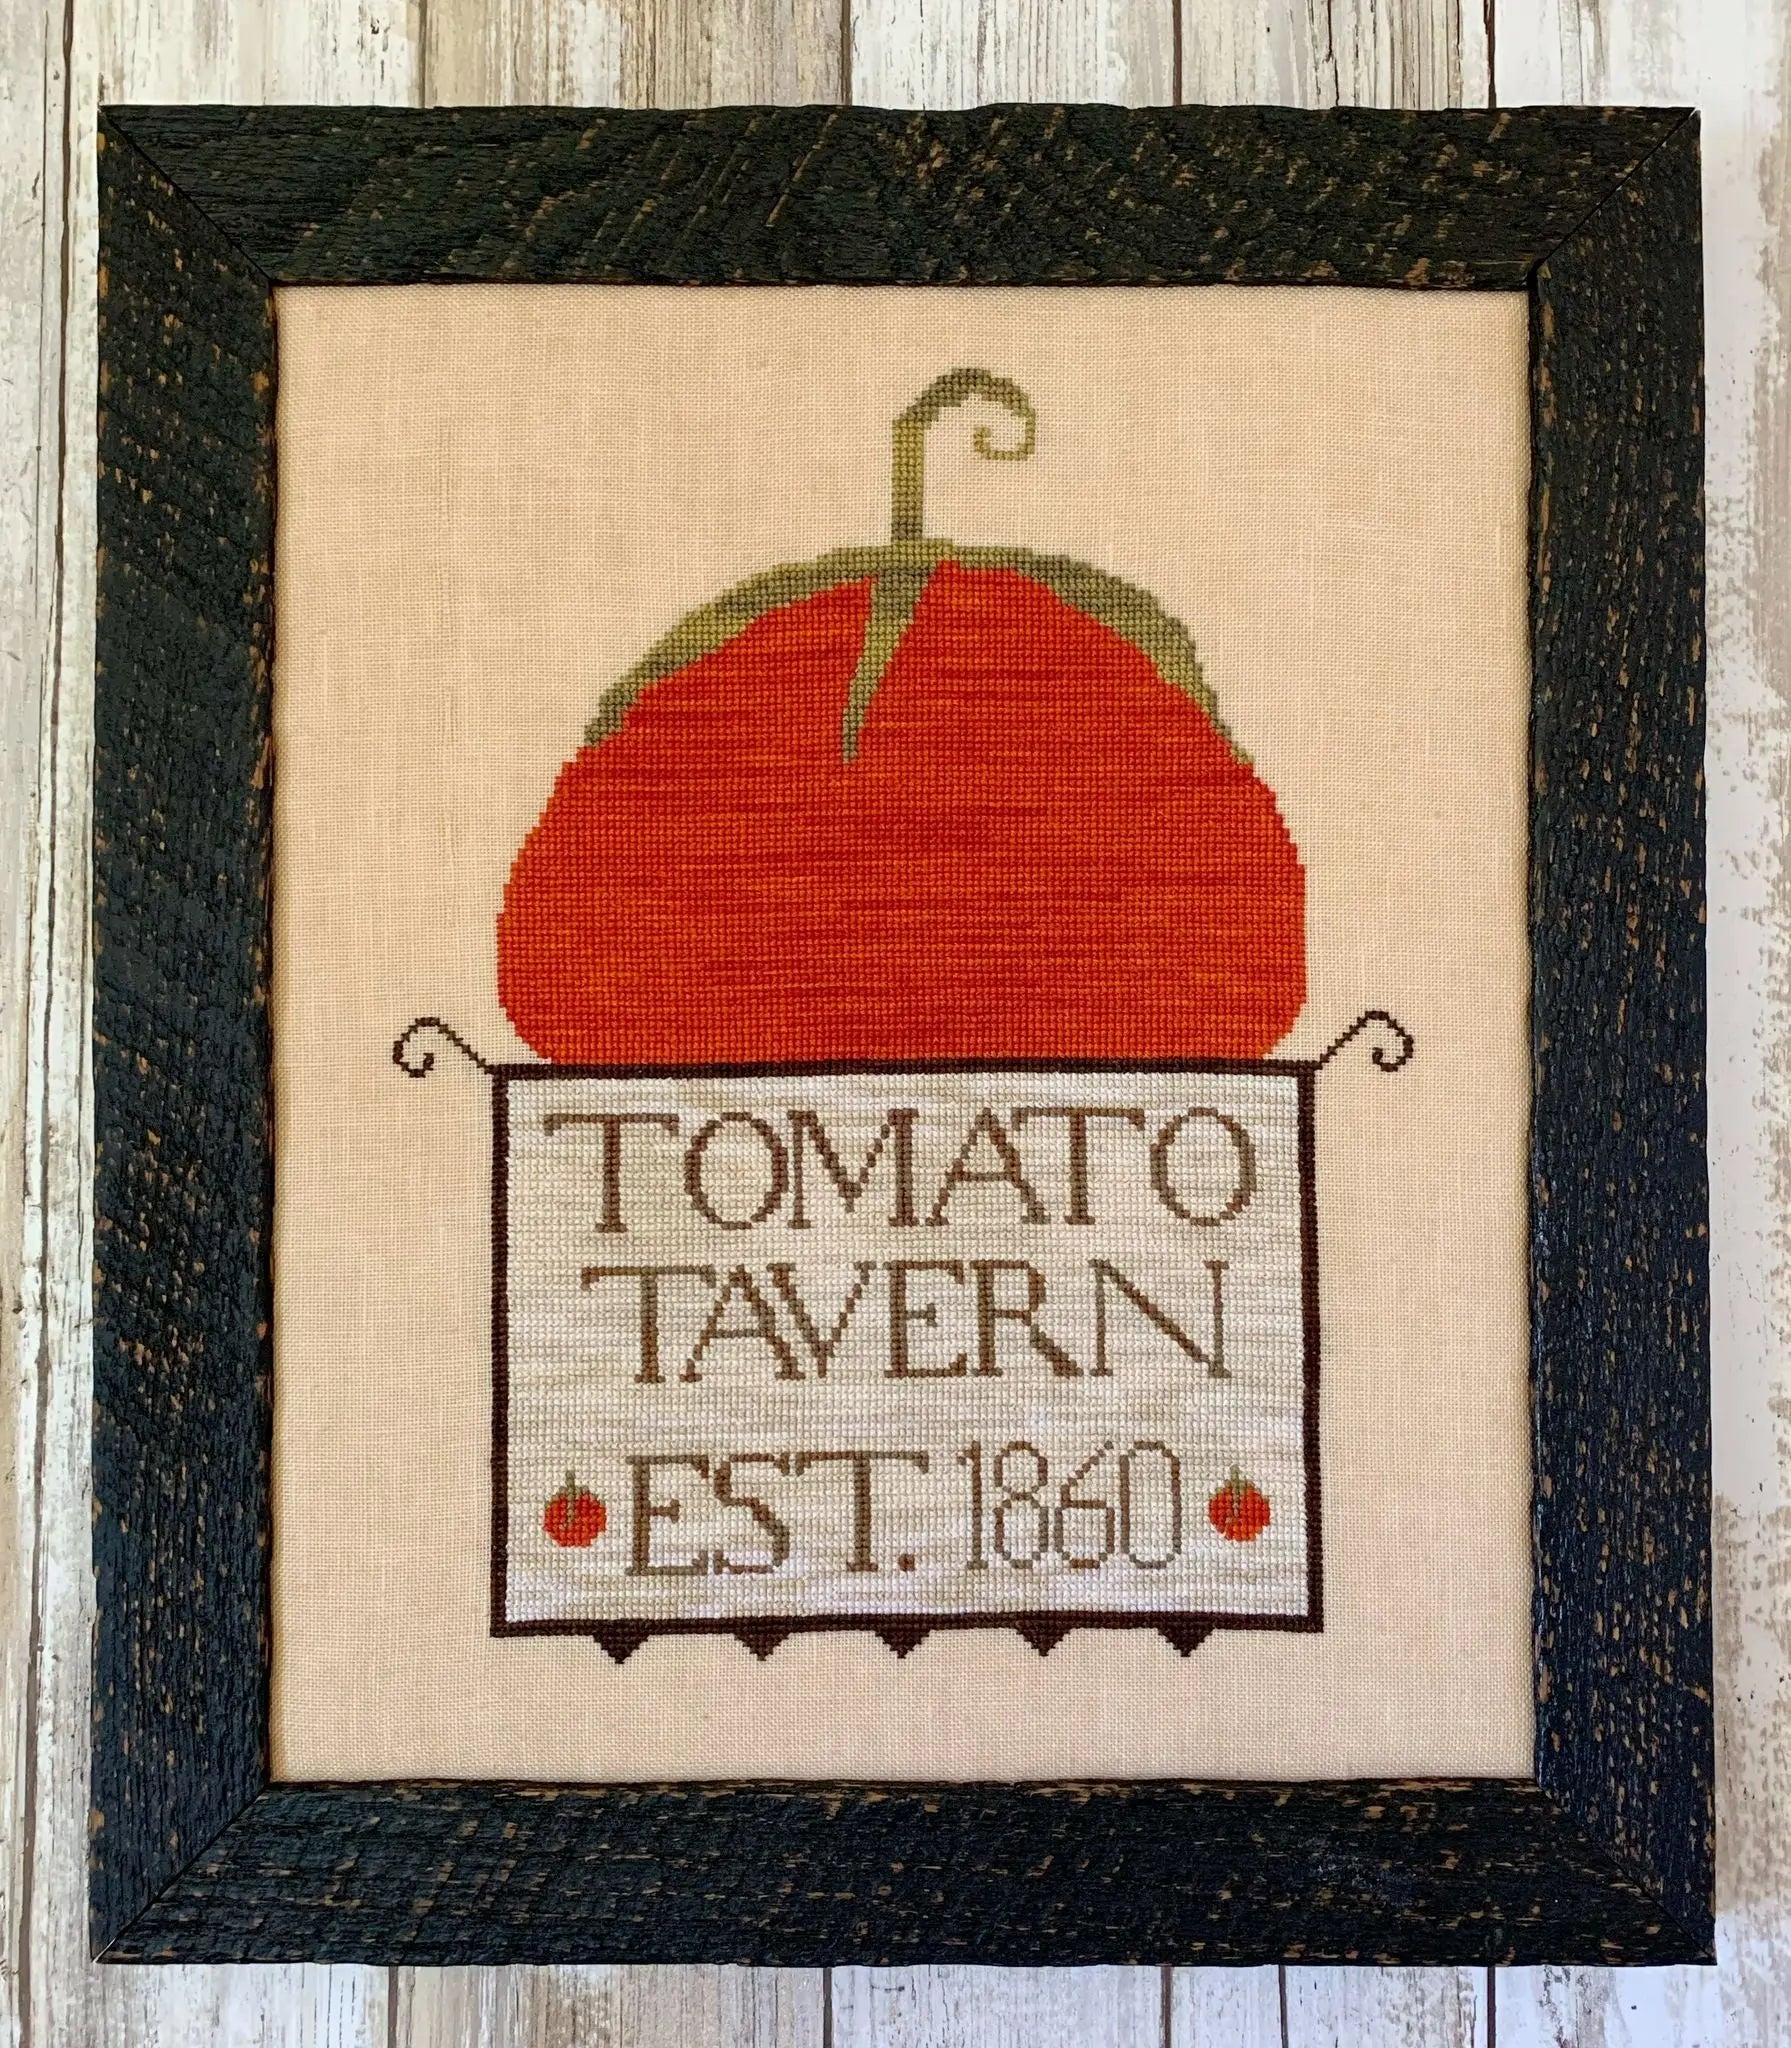 Tomato Tavern by Lucy Beam Lucy Beam